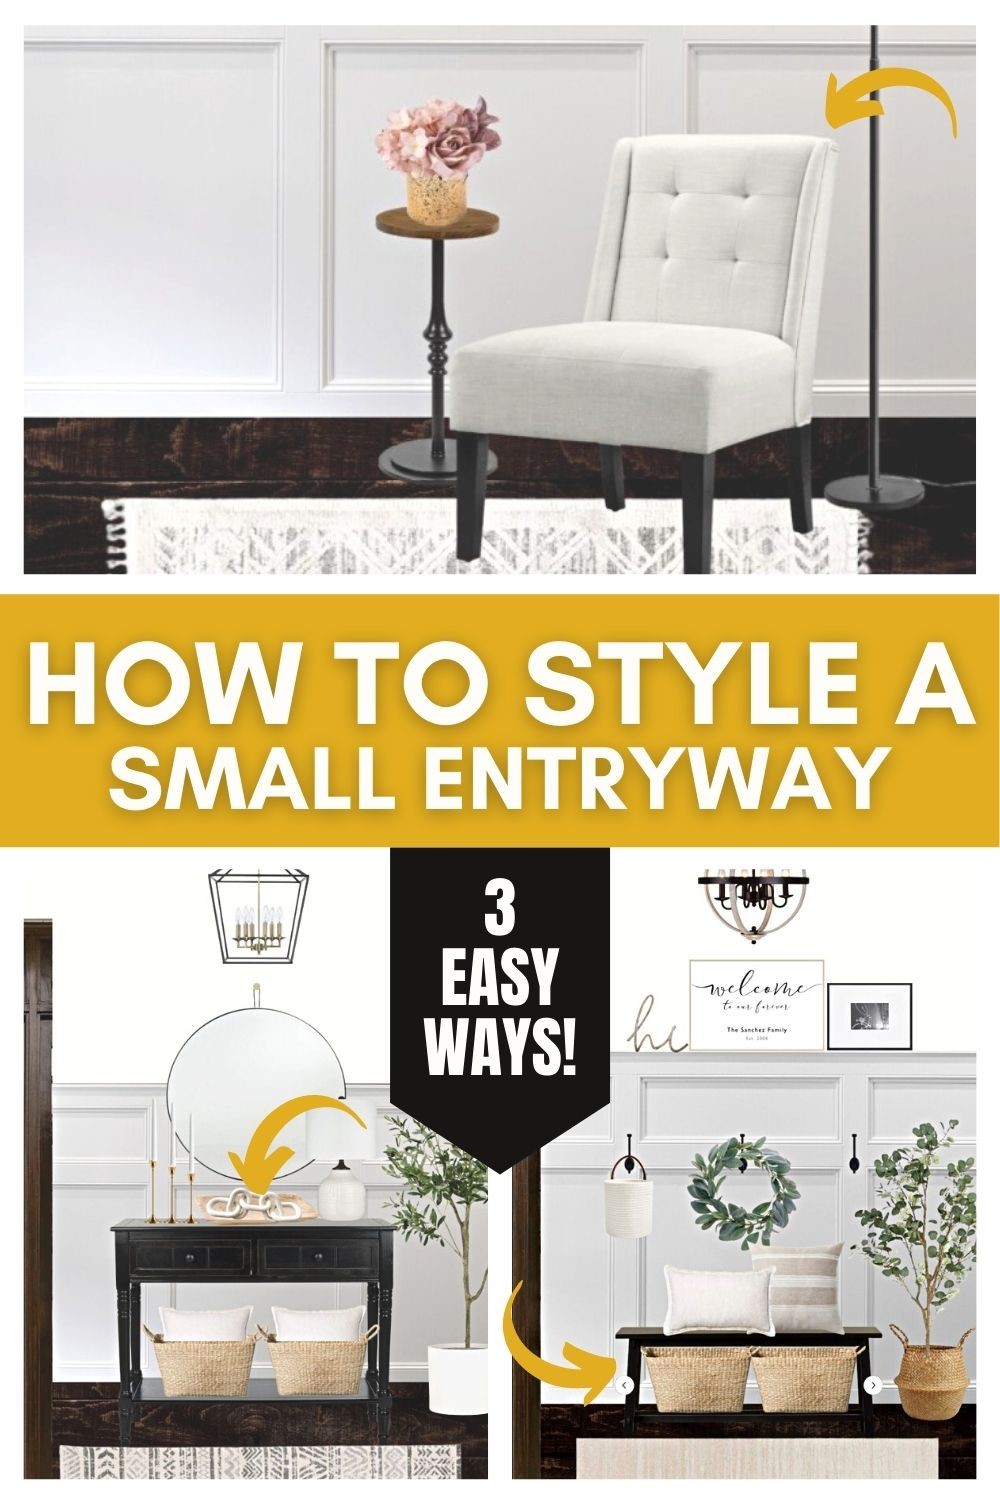 3 EASY WAYS TO STYLE A SMALL ENTRYWAY